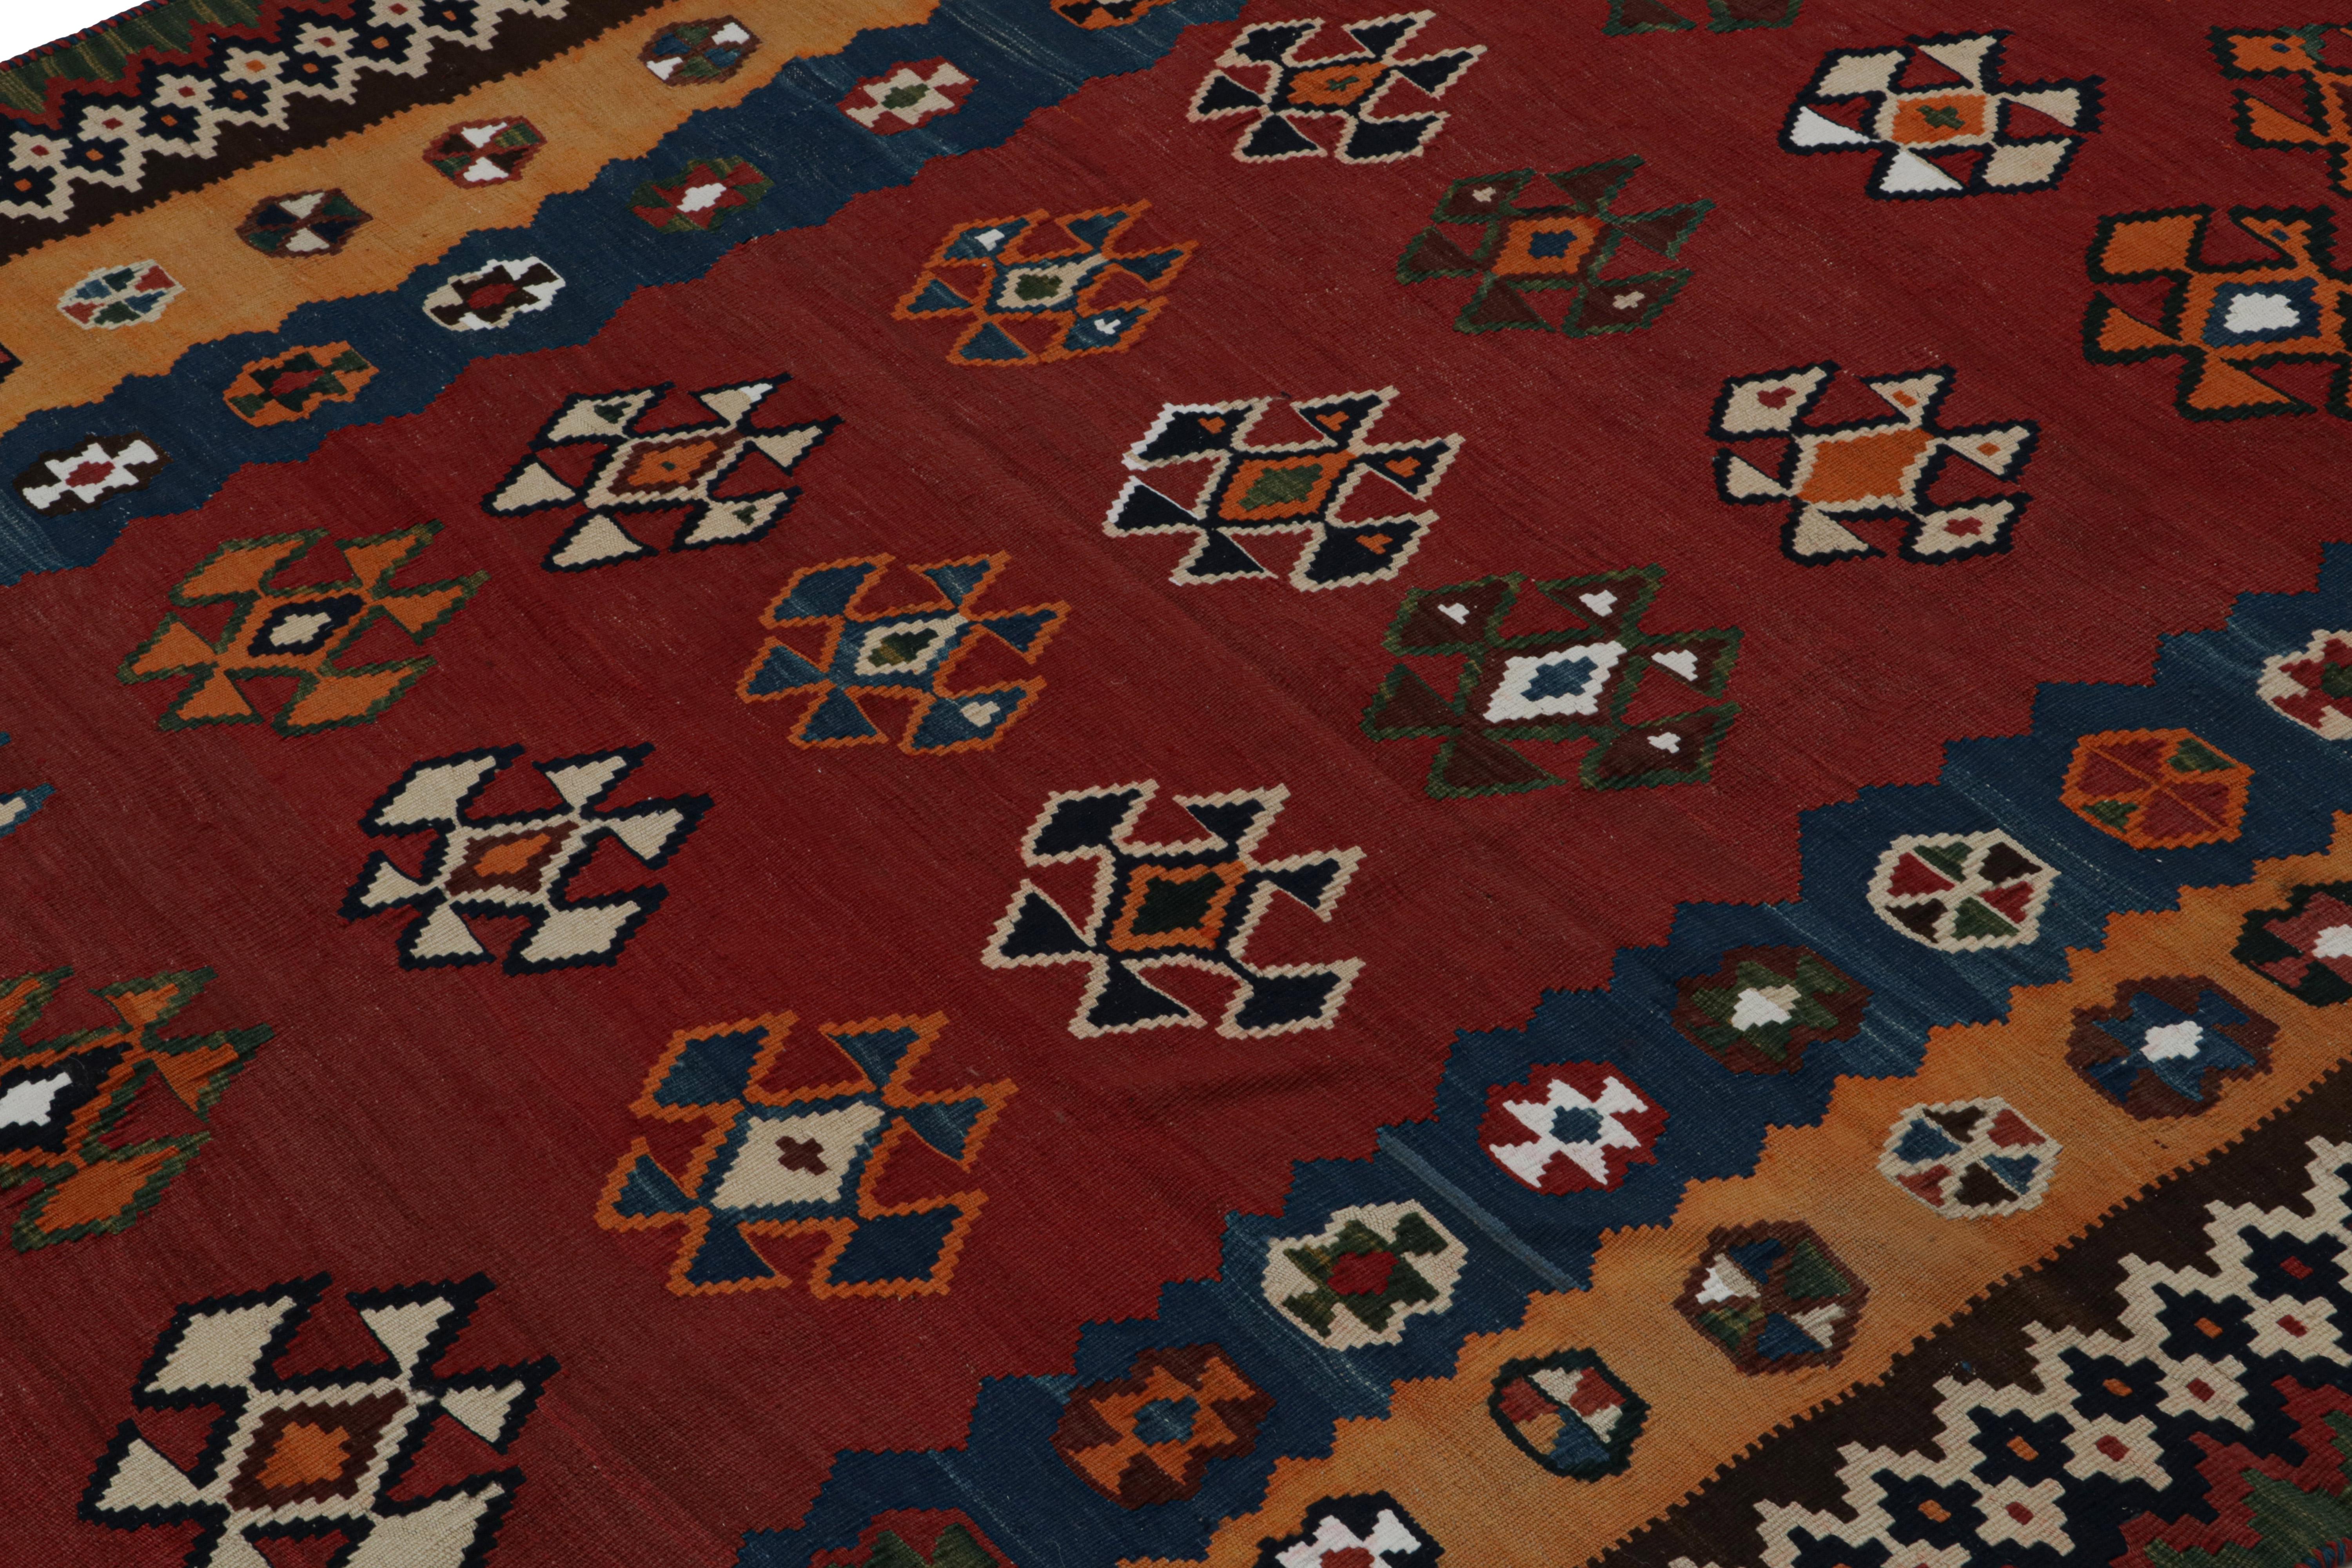 Hand-Woven Vintage Afghani tribal Kilim rug, with Geometric patterns, from Rug & Kilim For Sale